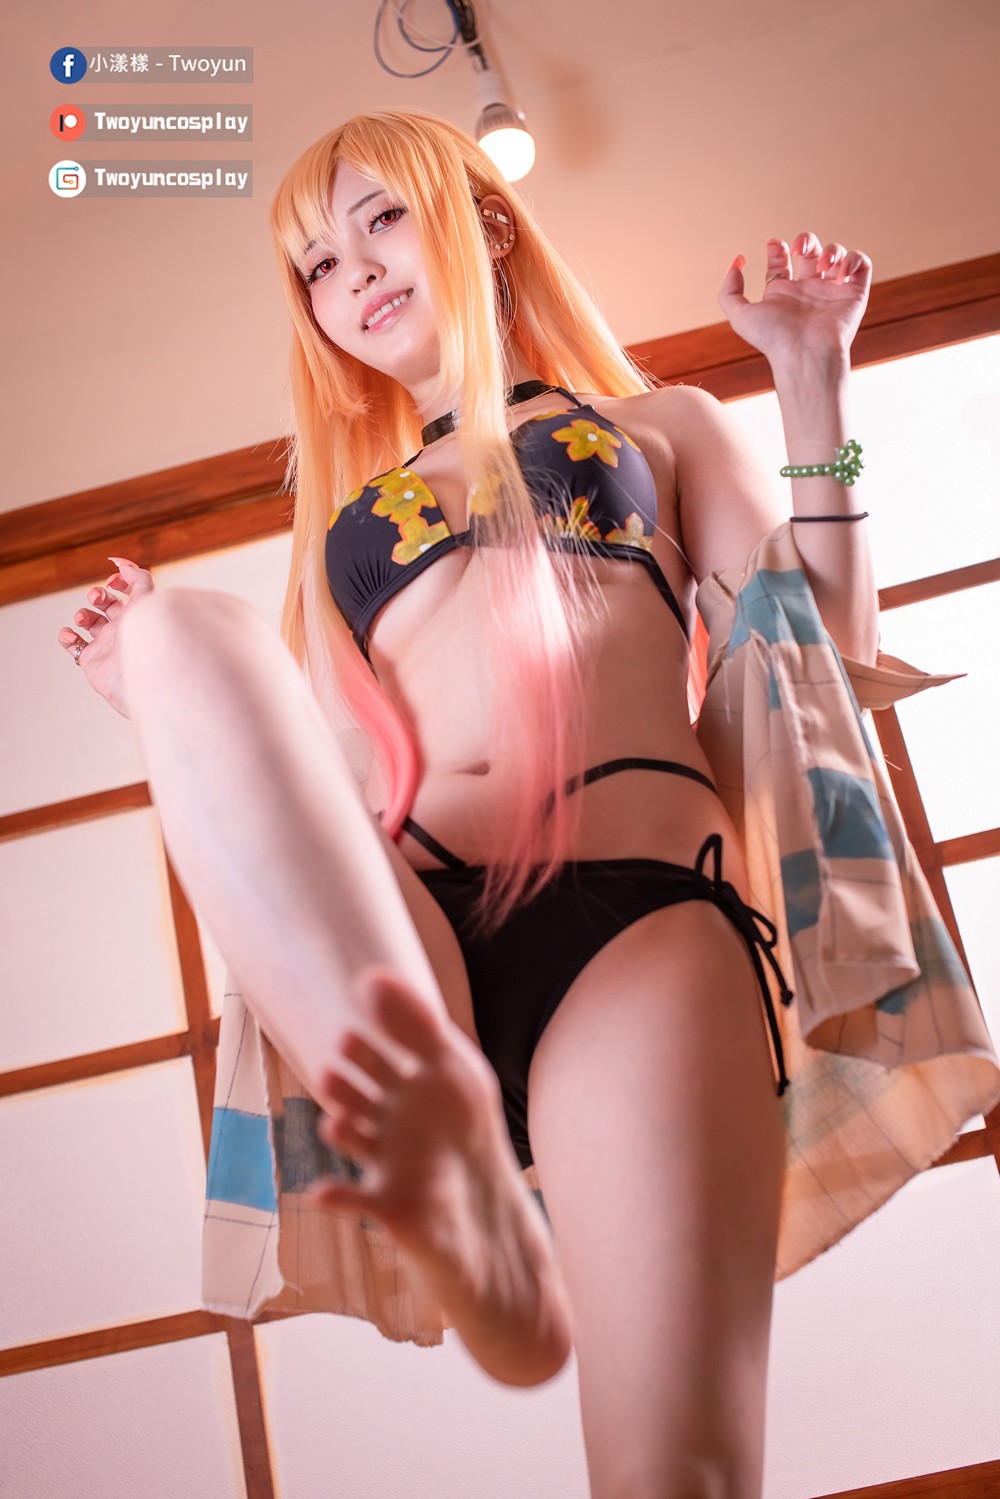 Twoyun cosplay   小漾樣 cosplay (Updated 2022-01-23) - COSPLAY -